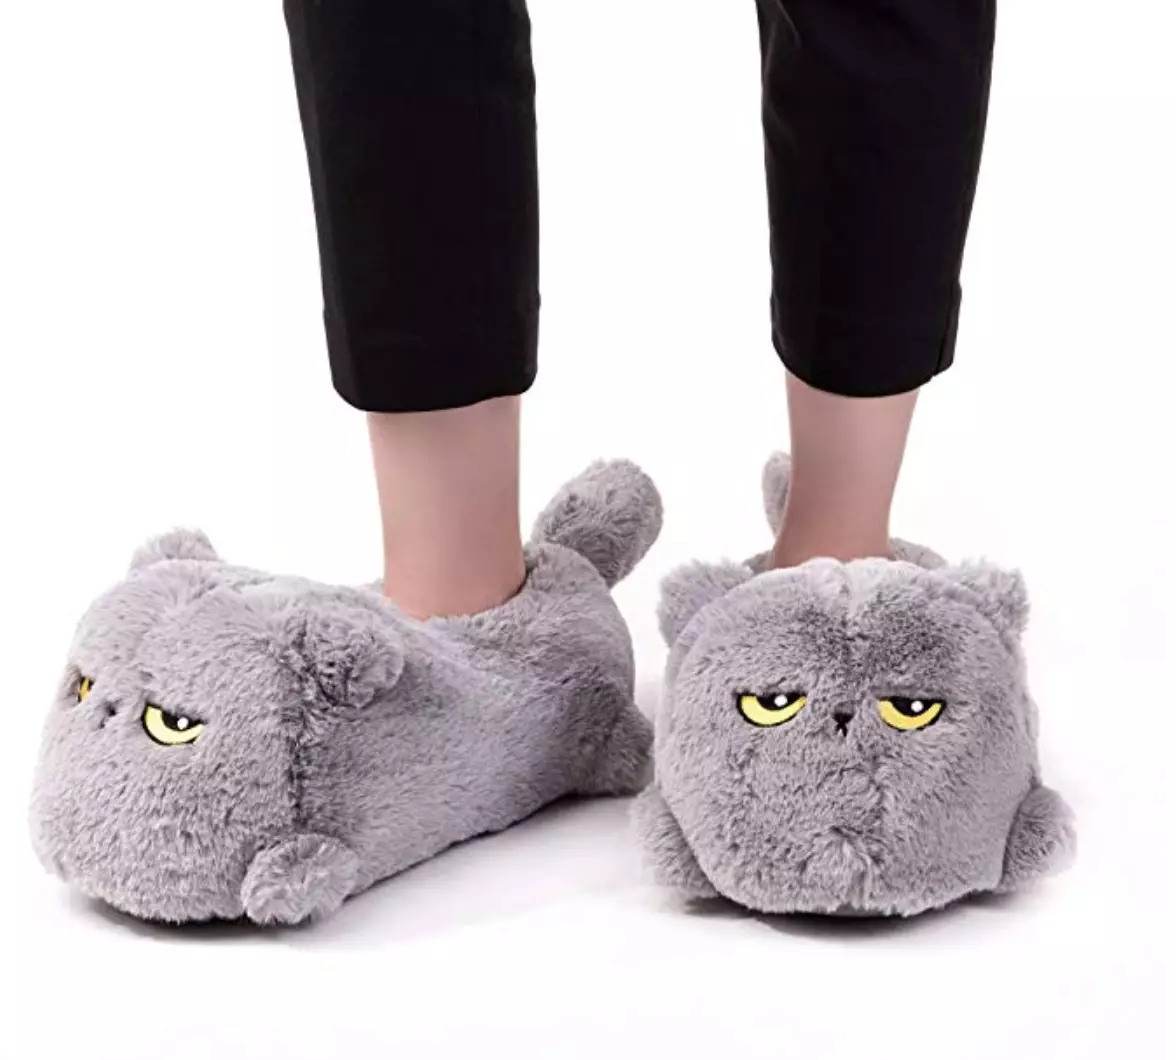 Charge them slippers and slip your feet in!